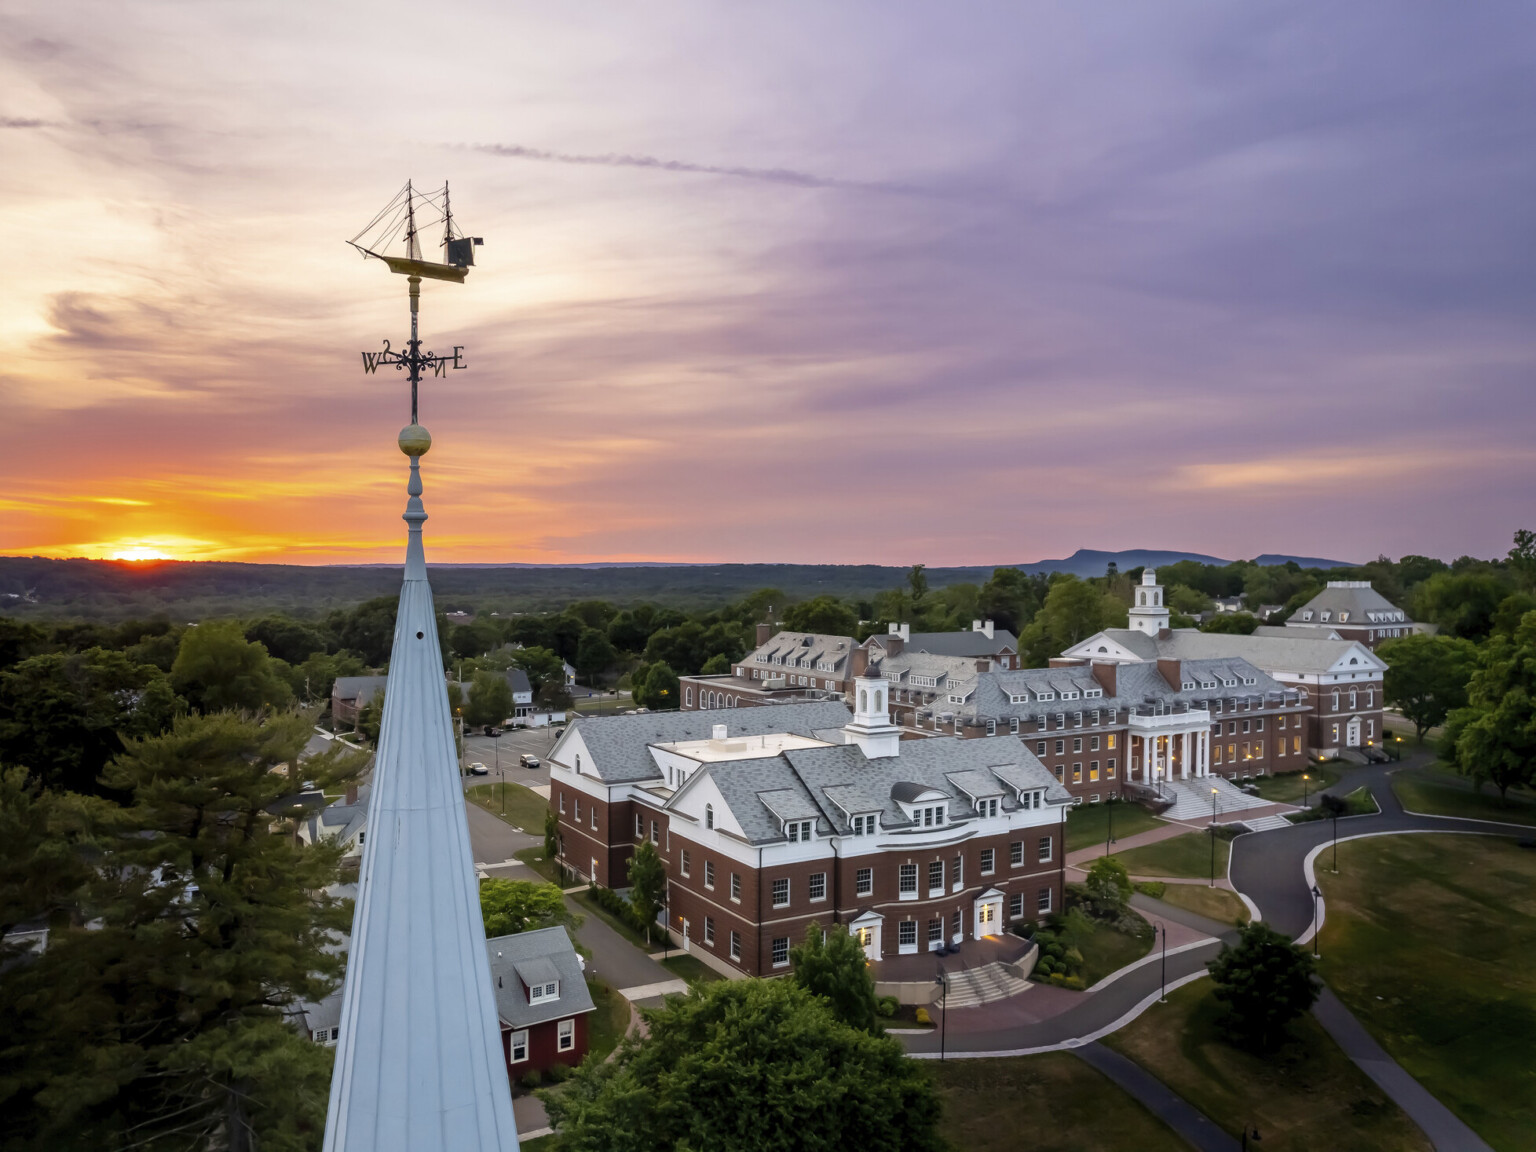 View of Choate Rosemary Hall's St. John Student Center and Hill House, seen from adjacent spire with ship weathervane at sunset